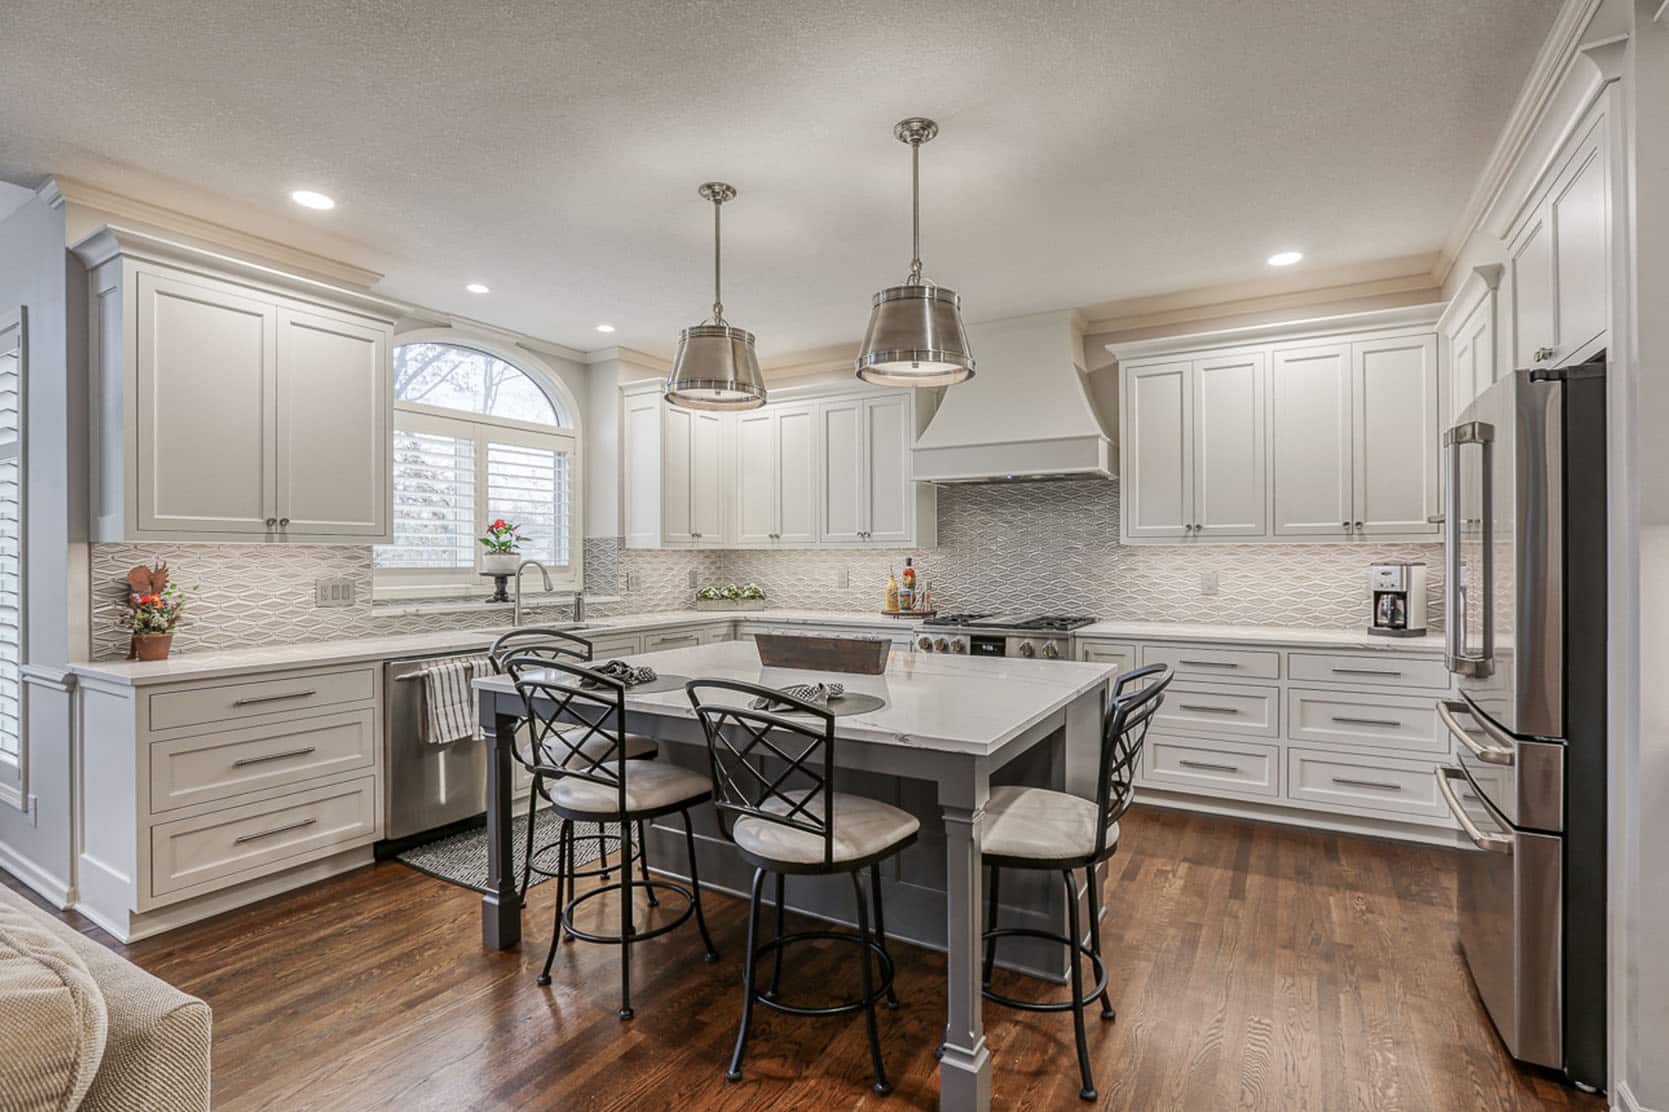 kitchen with white cabinets